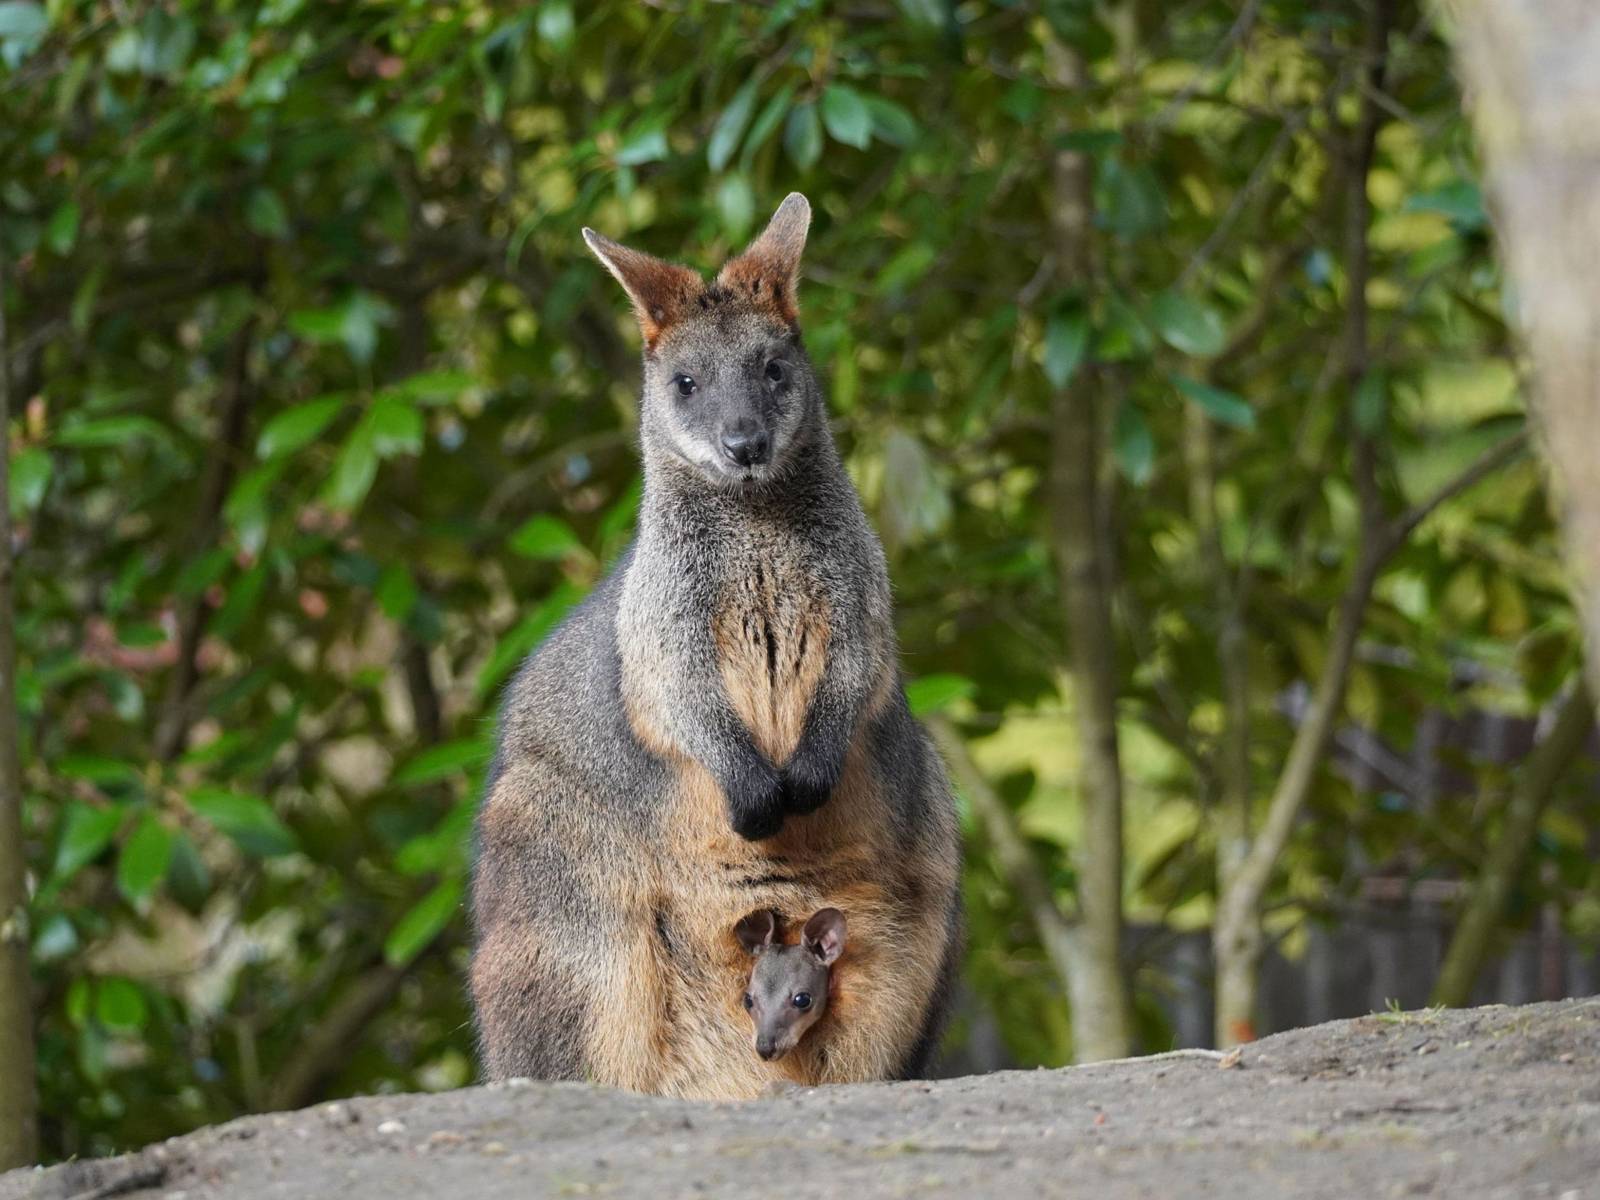 Sumpfwallaby mit Jungtier im Zoo.